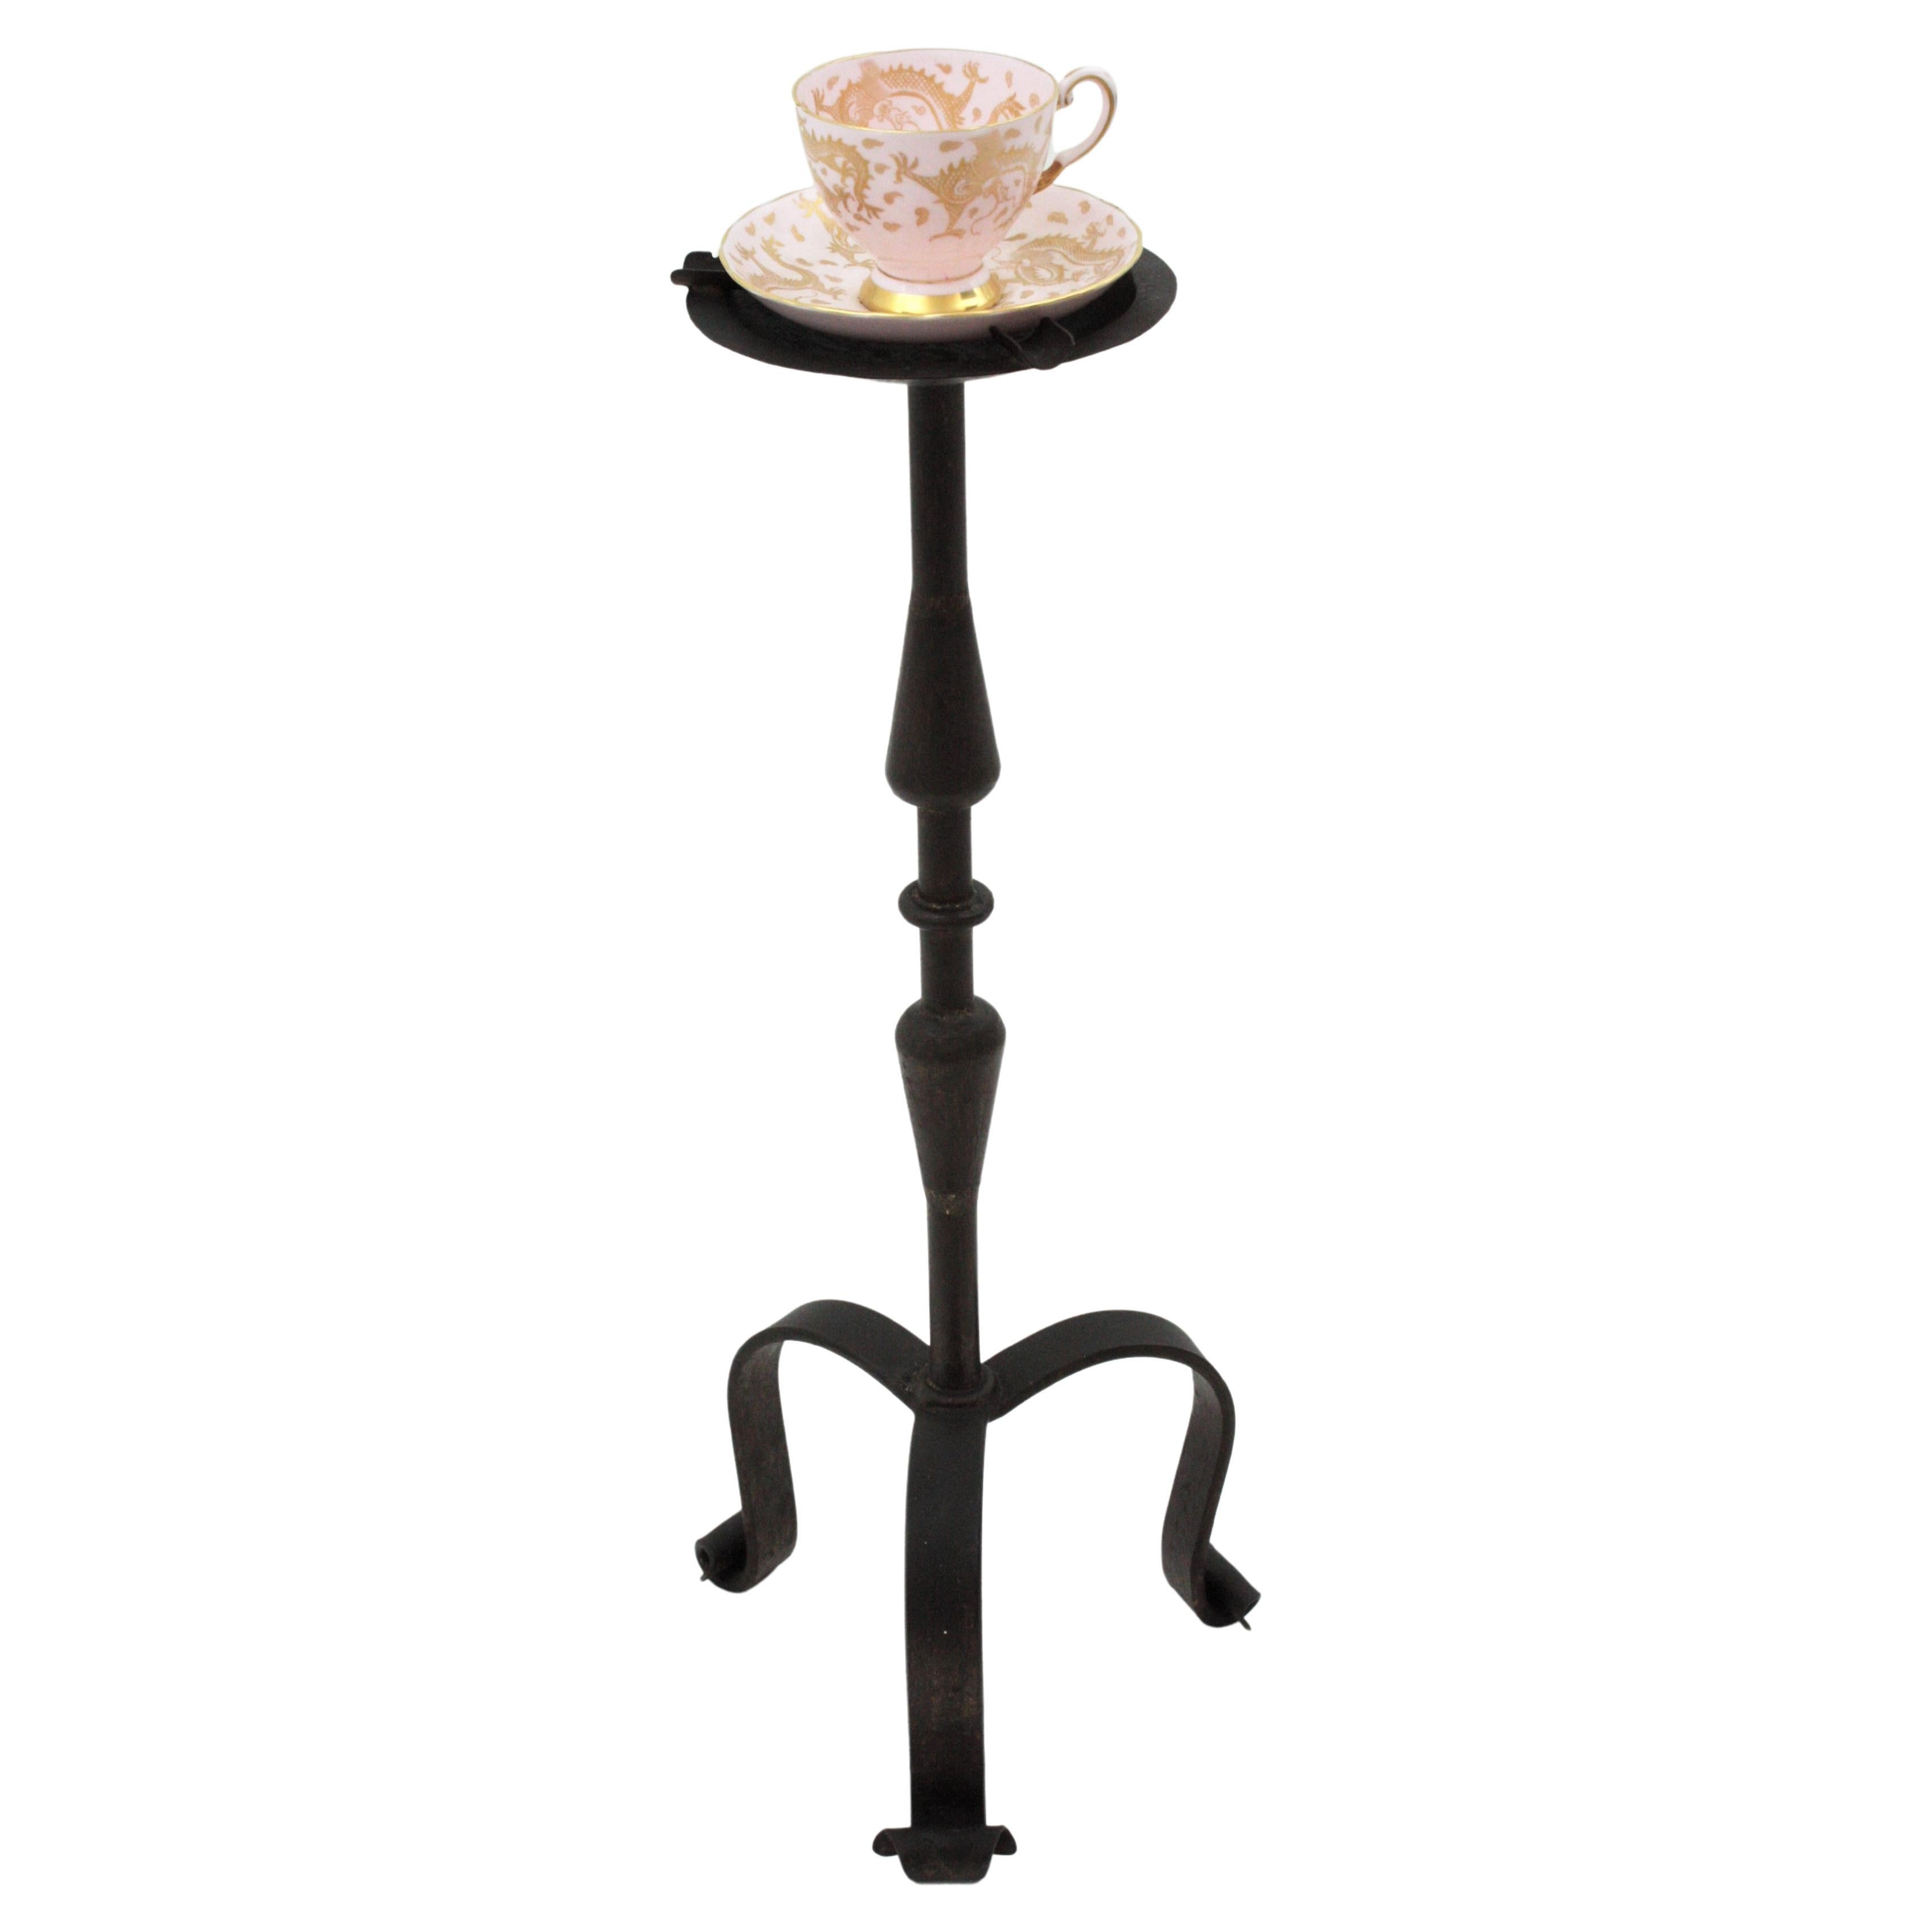 Spanish Drinks Table / End Table / Floor Ashtray in Wrought Iron For Sale